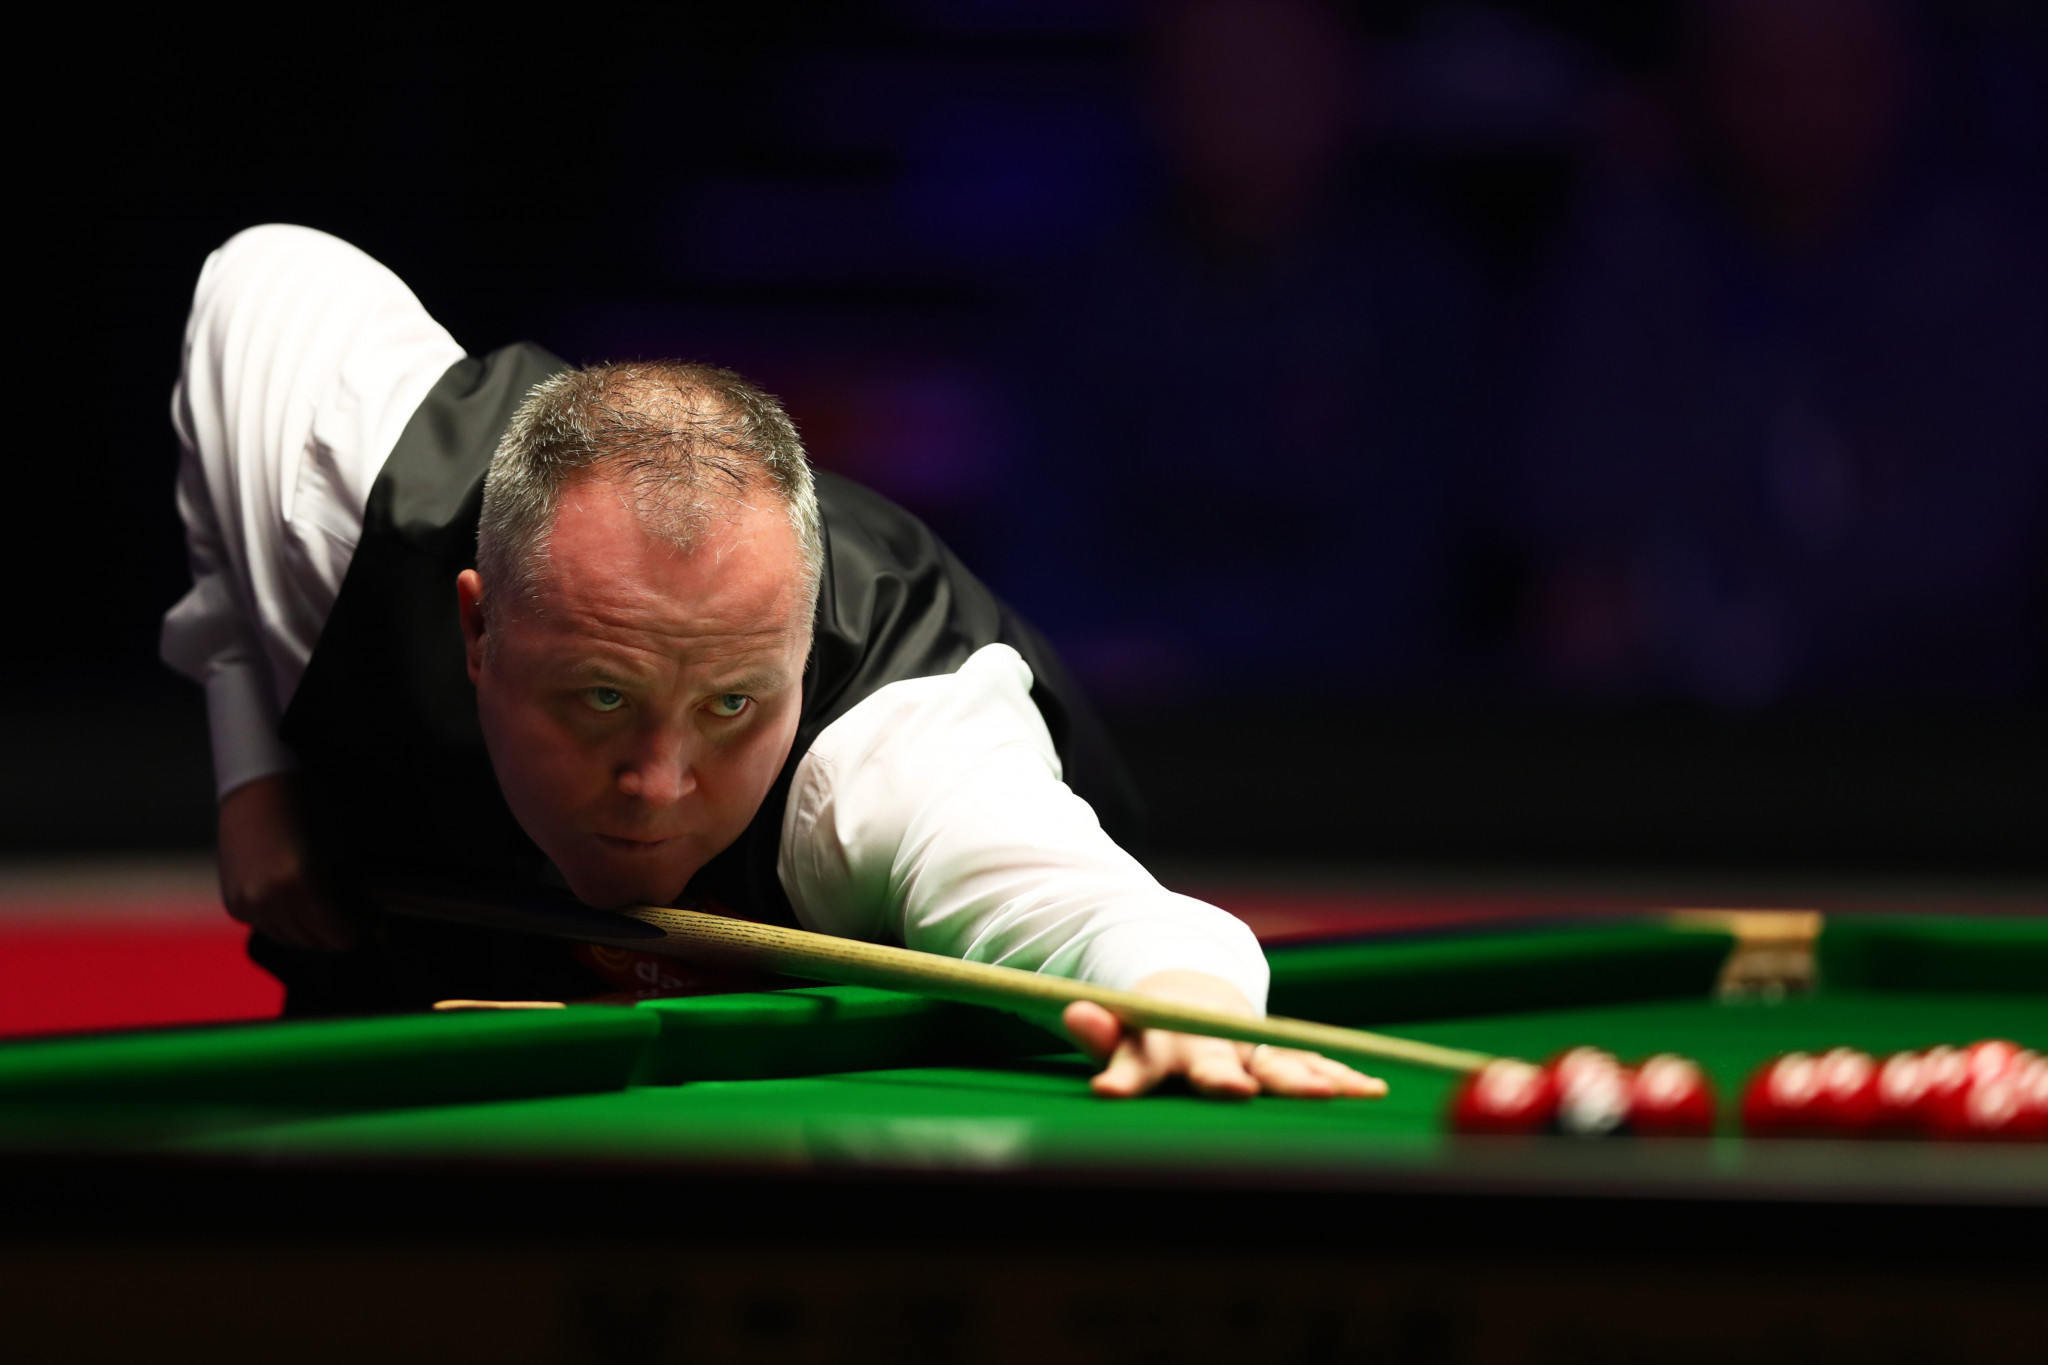 Higgins trailing Gilbert after first session of semi-final at World Snooker Championship